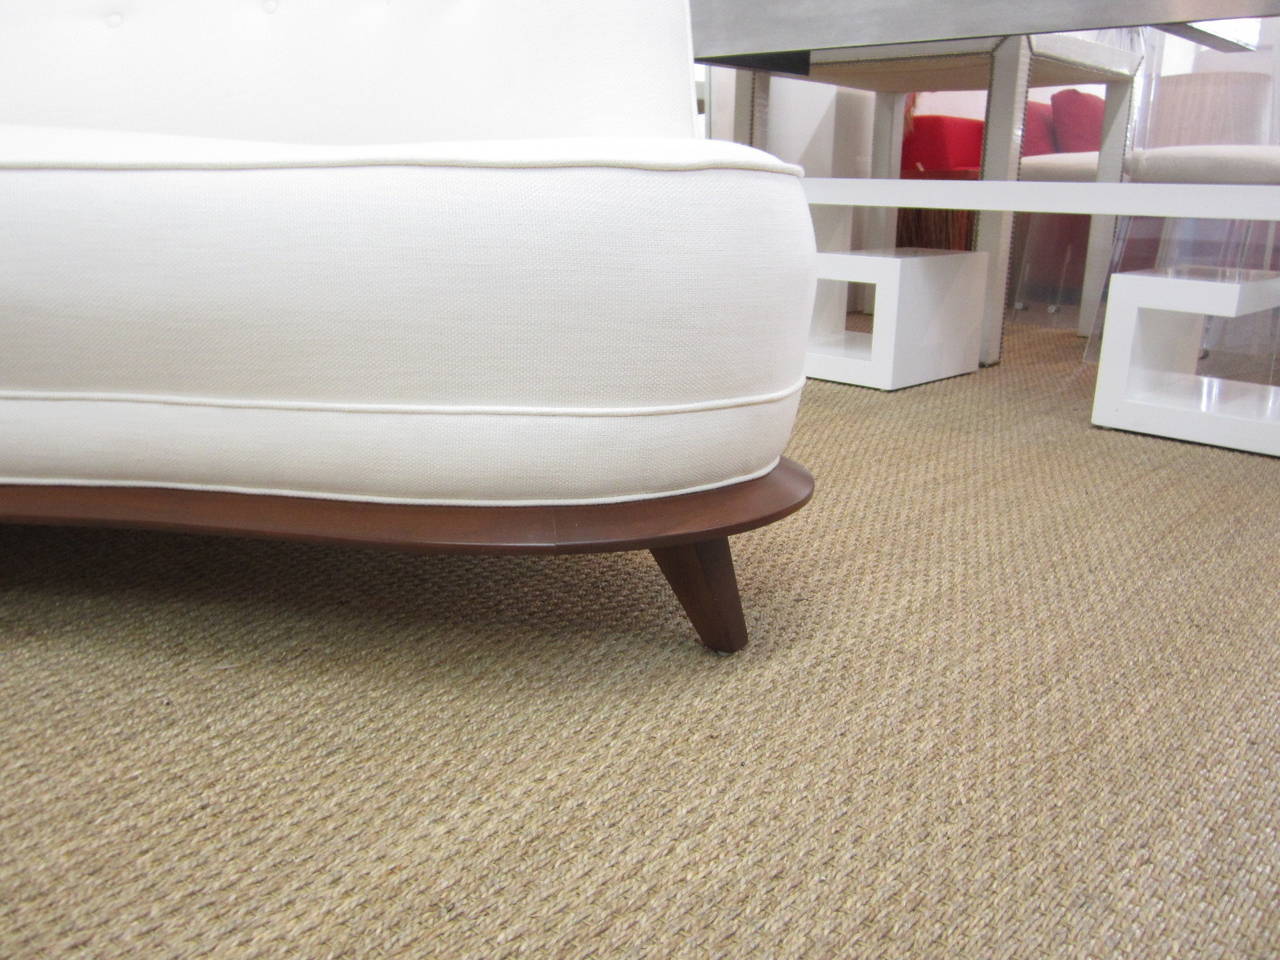 American Sinuous Three-Part Midcentury Sofa with Upholstered Center Table